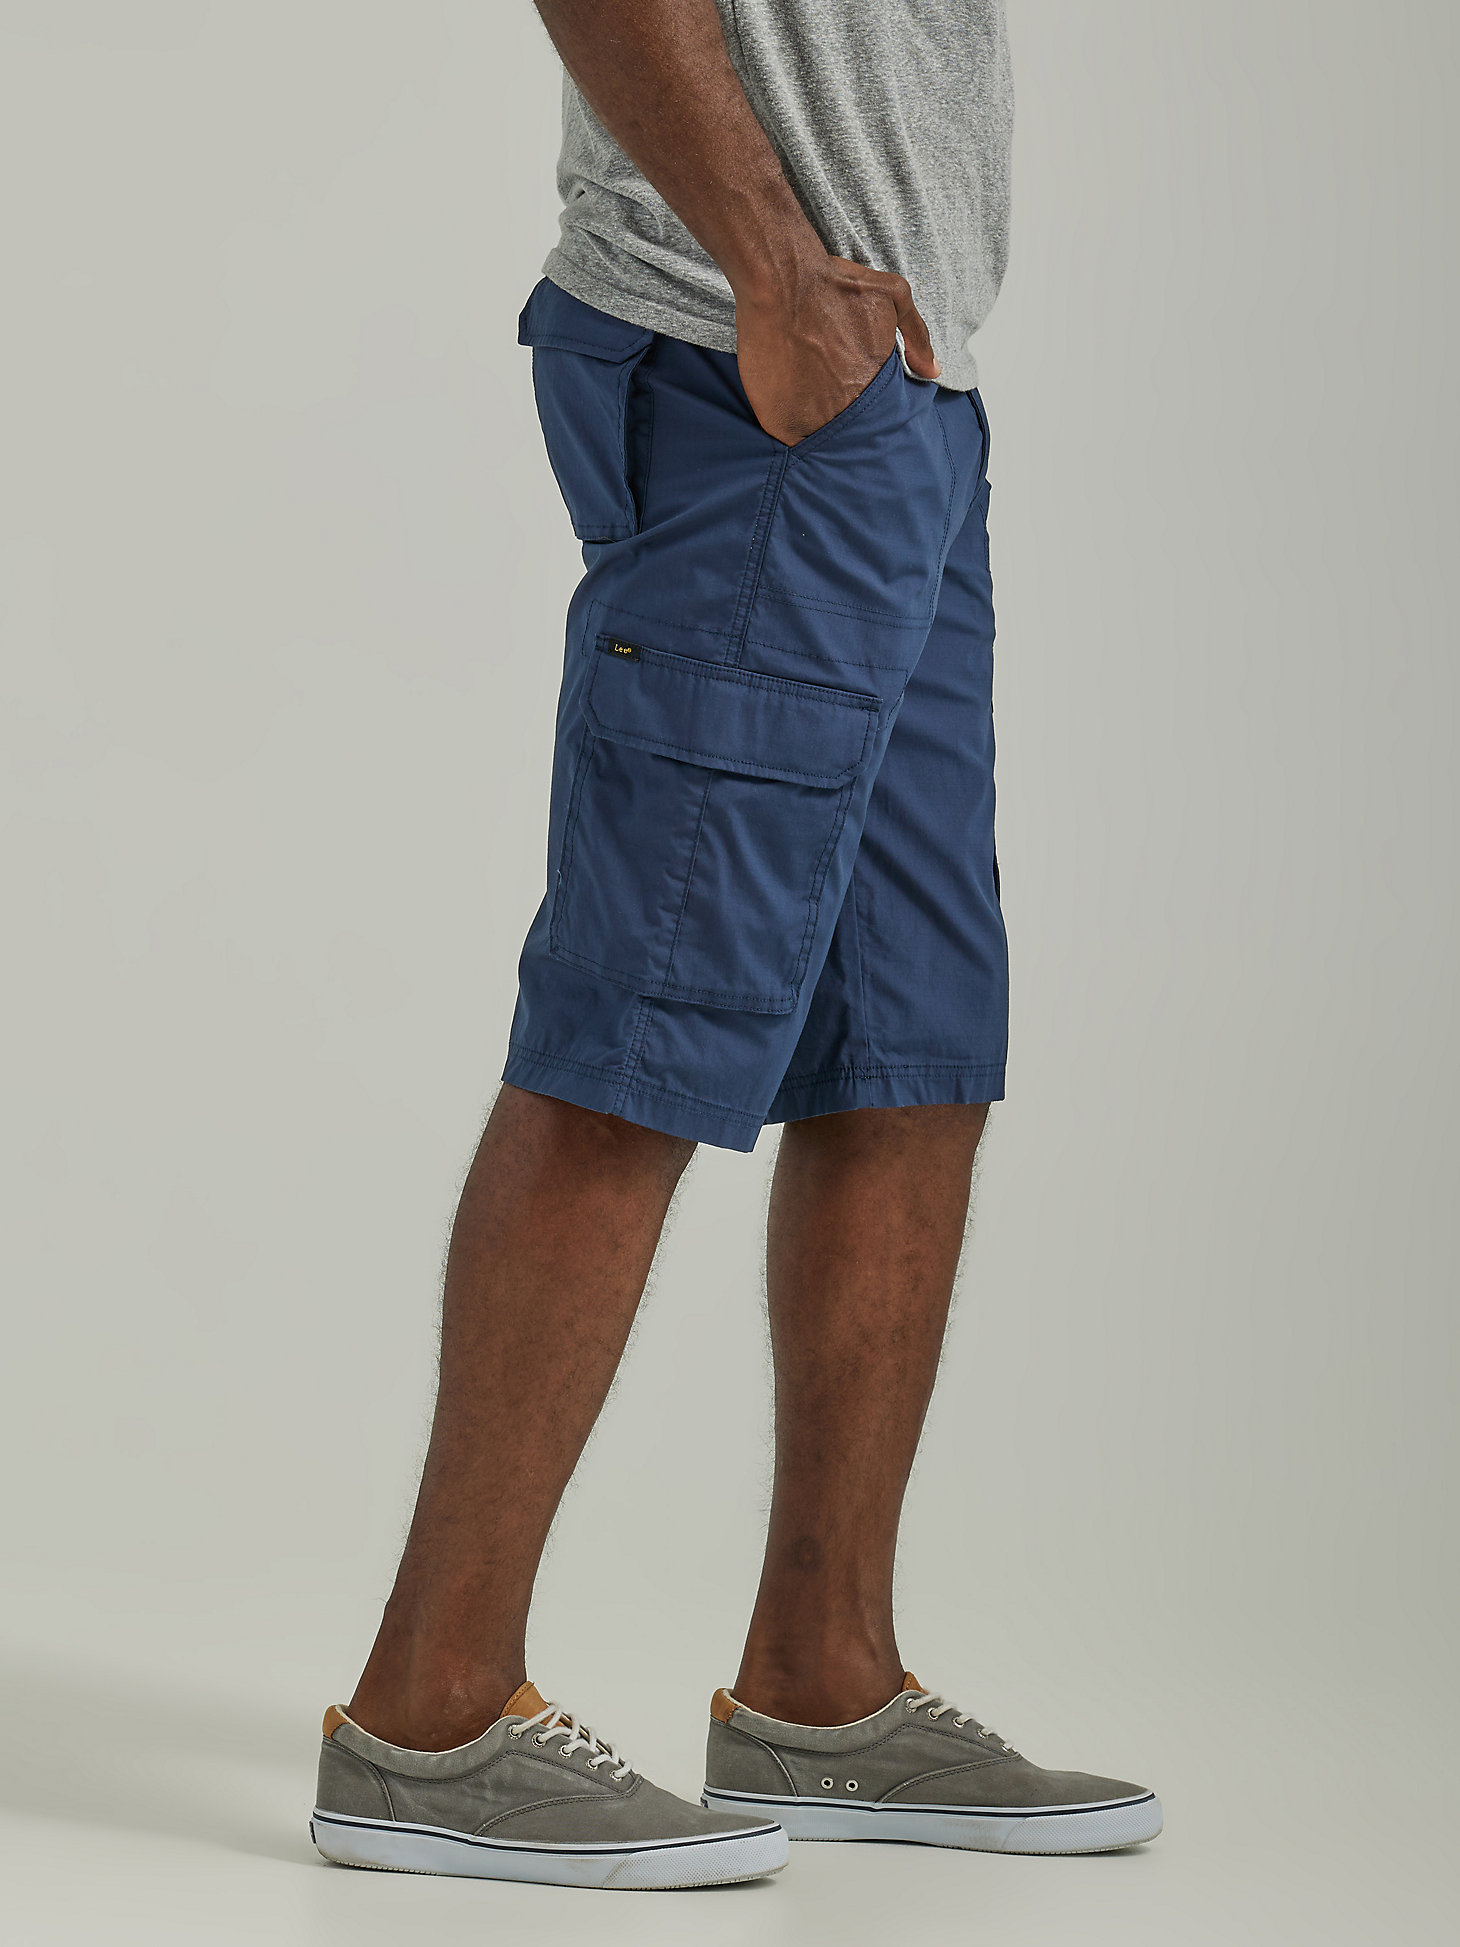 Men's Extreme Motion Cameron Relaxed Fit Cargo Short in Navy alternative view 2